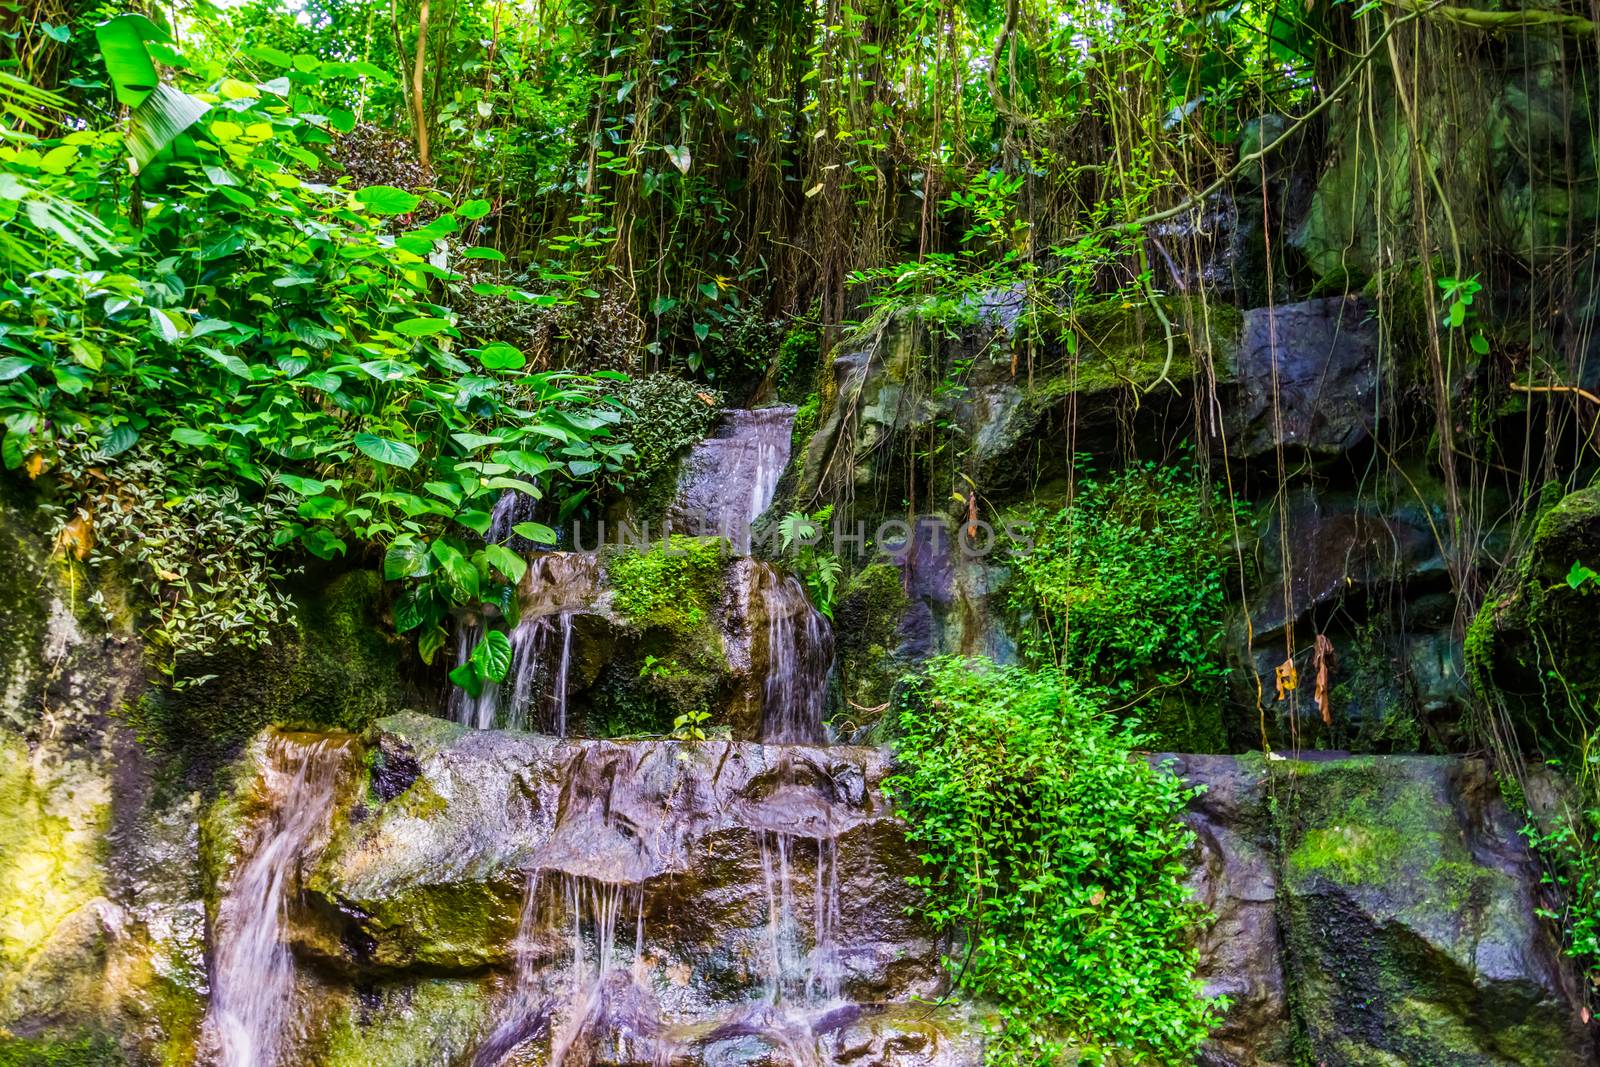 steaming water of rocks in a jungle scenery with many plants, nature background